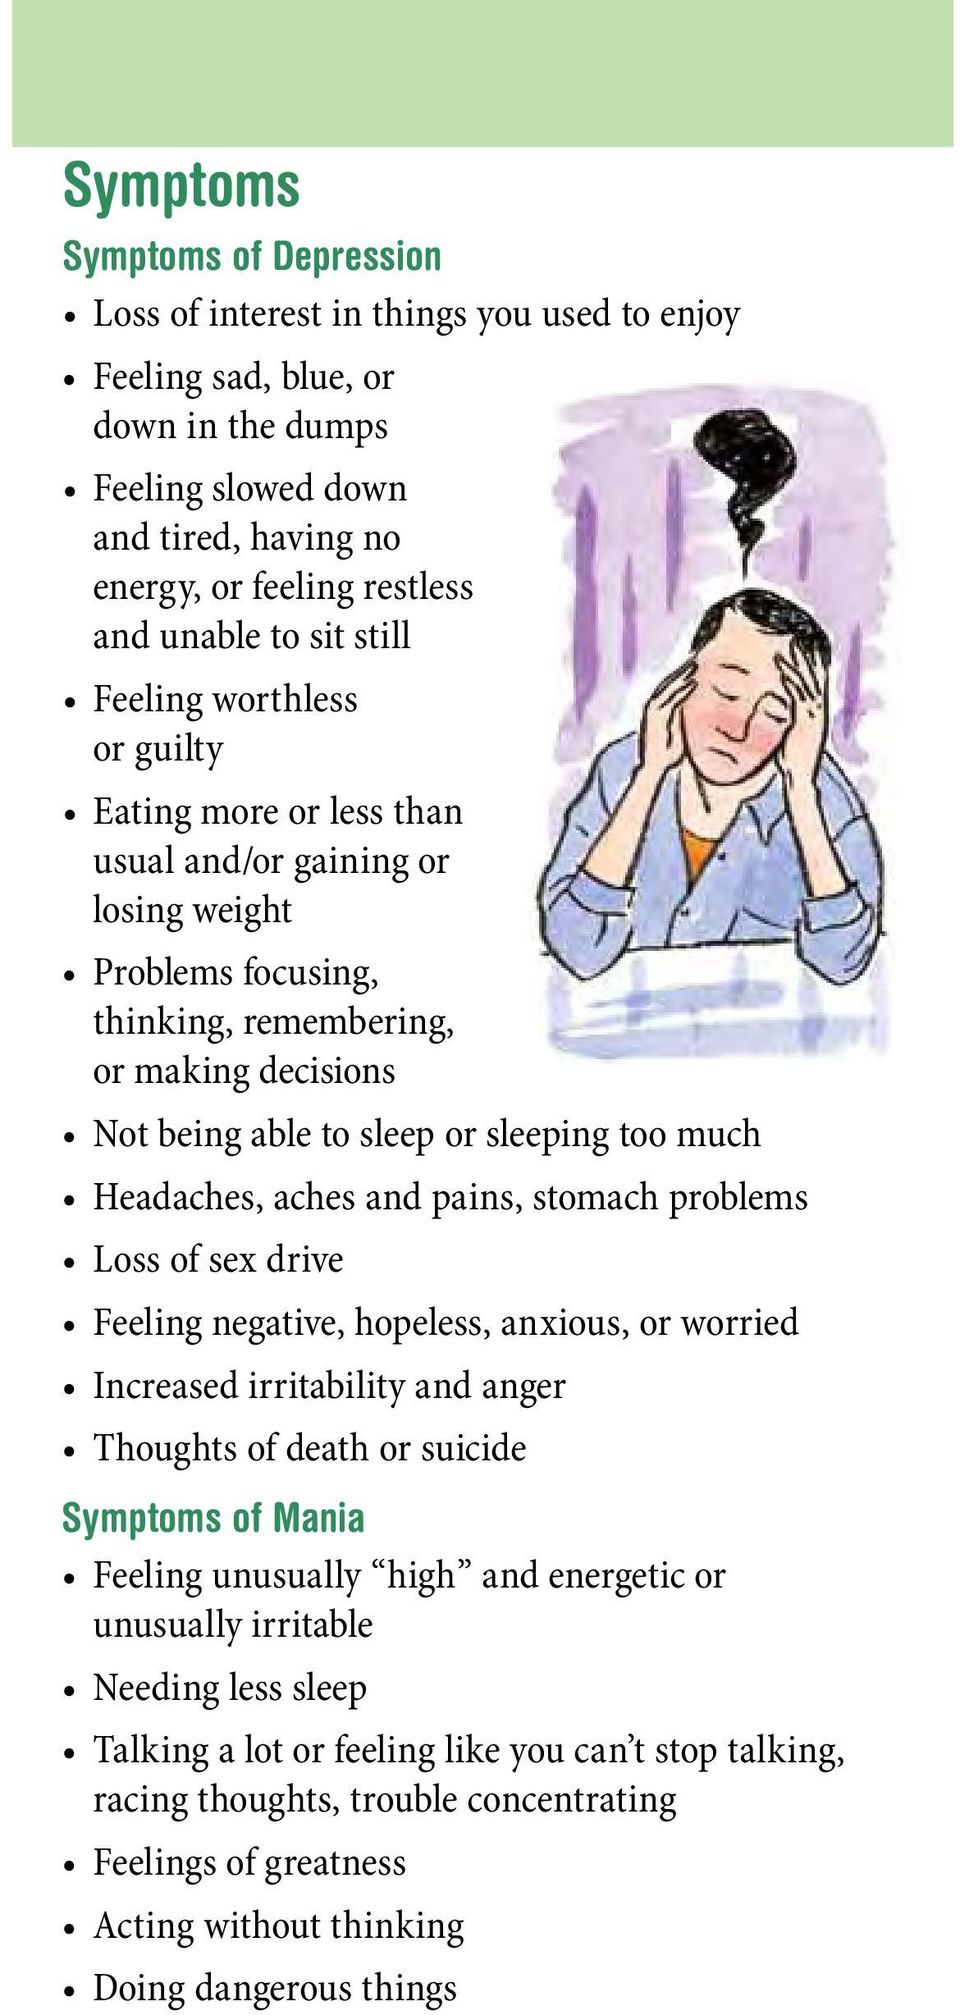 too much Headaches, aches and pains, stomach problems Loss of sex drive Feeling negative, hopeless, anxious, or worried Increased irritability and anger Thoughts of death or suicide Symptoms of Mania